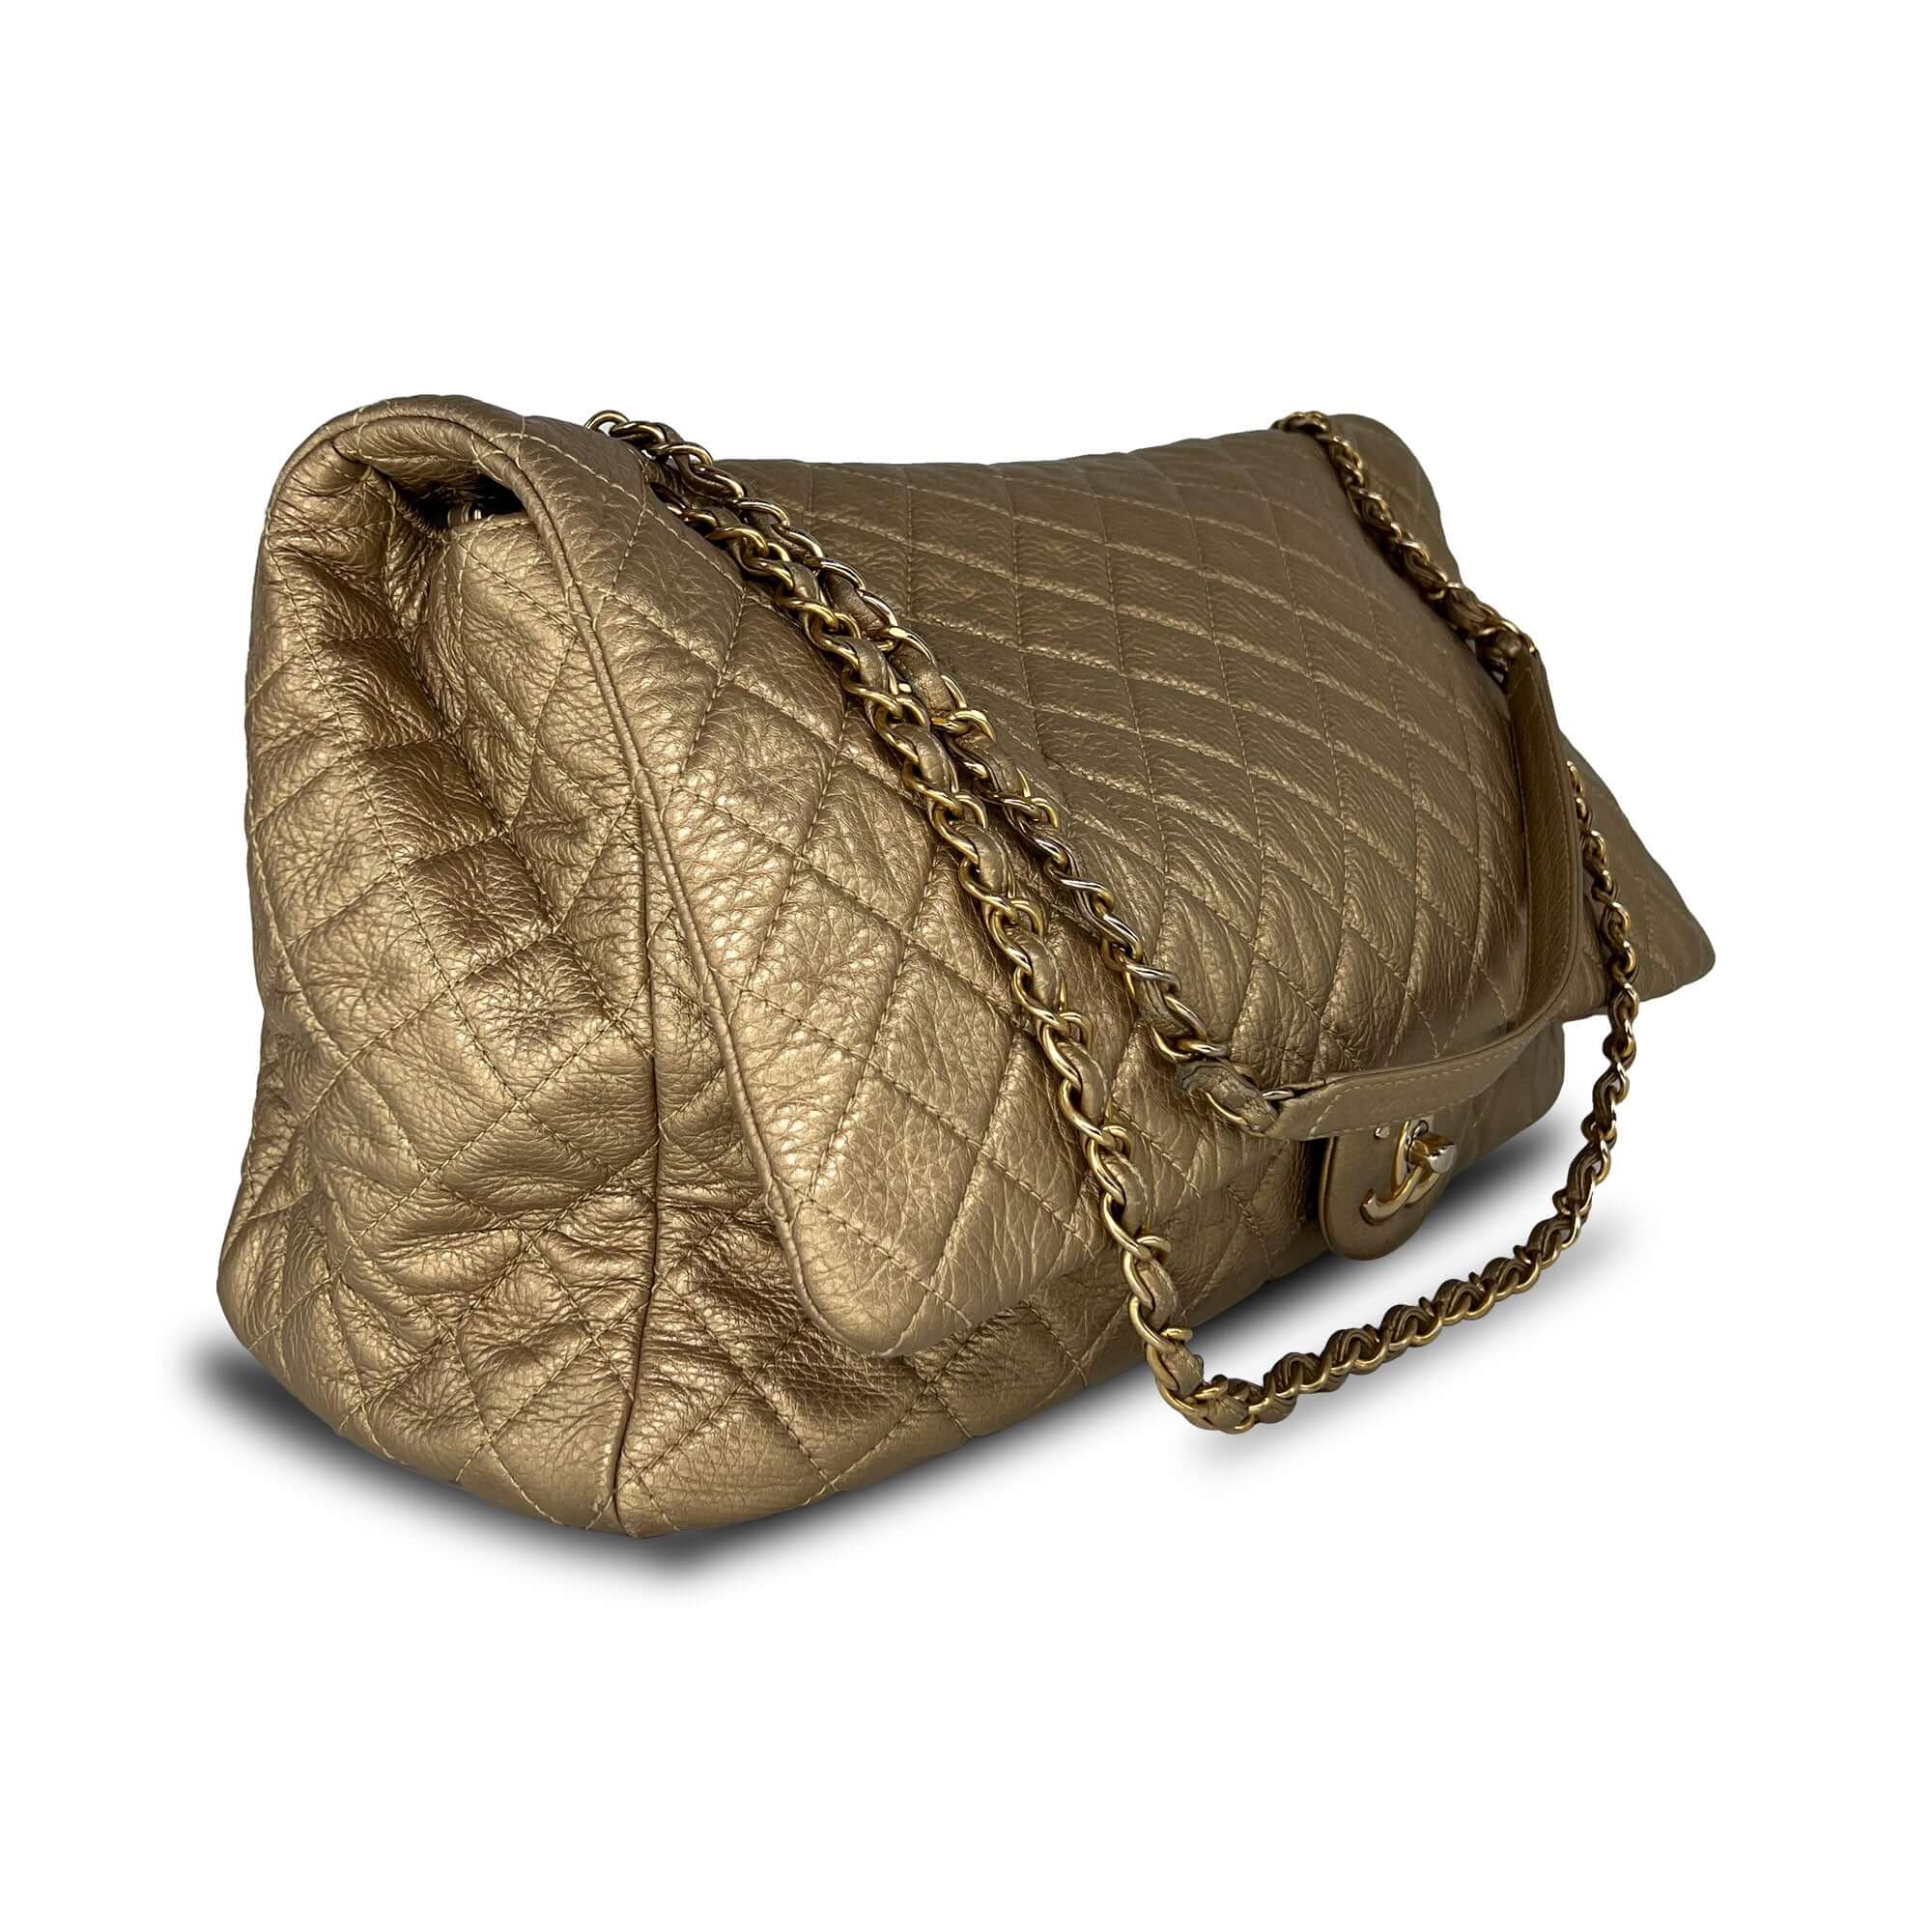 Chanel gold quilted leather travel bag